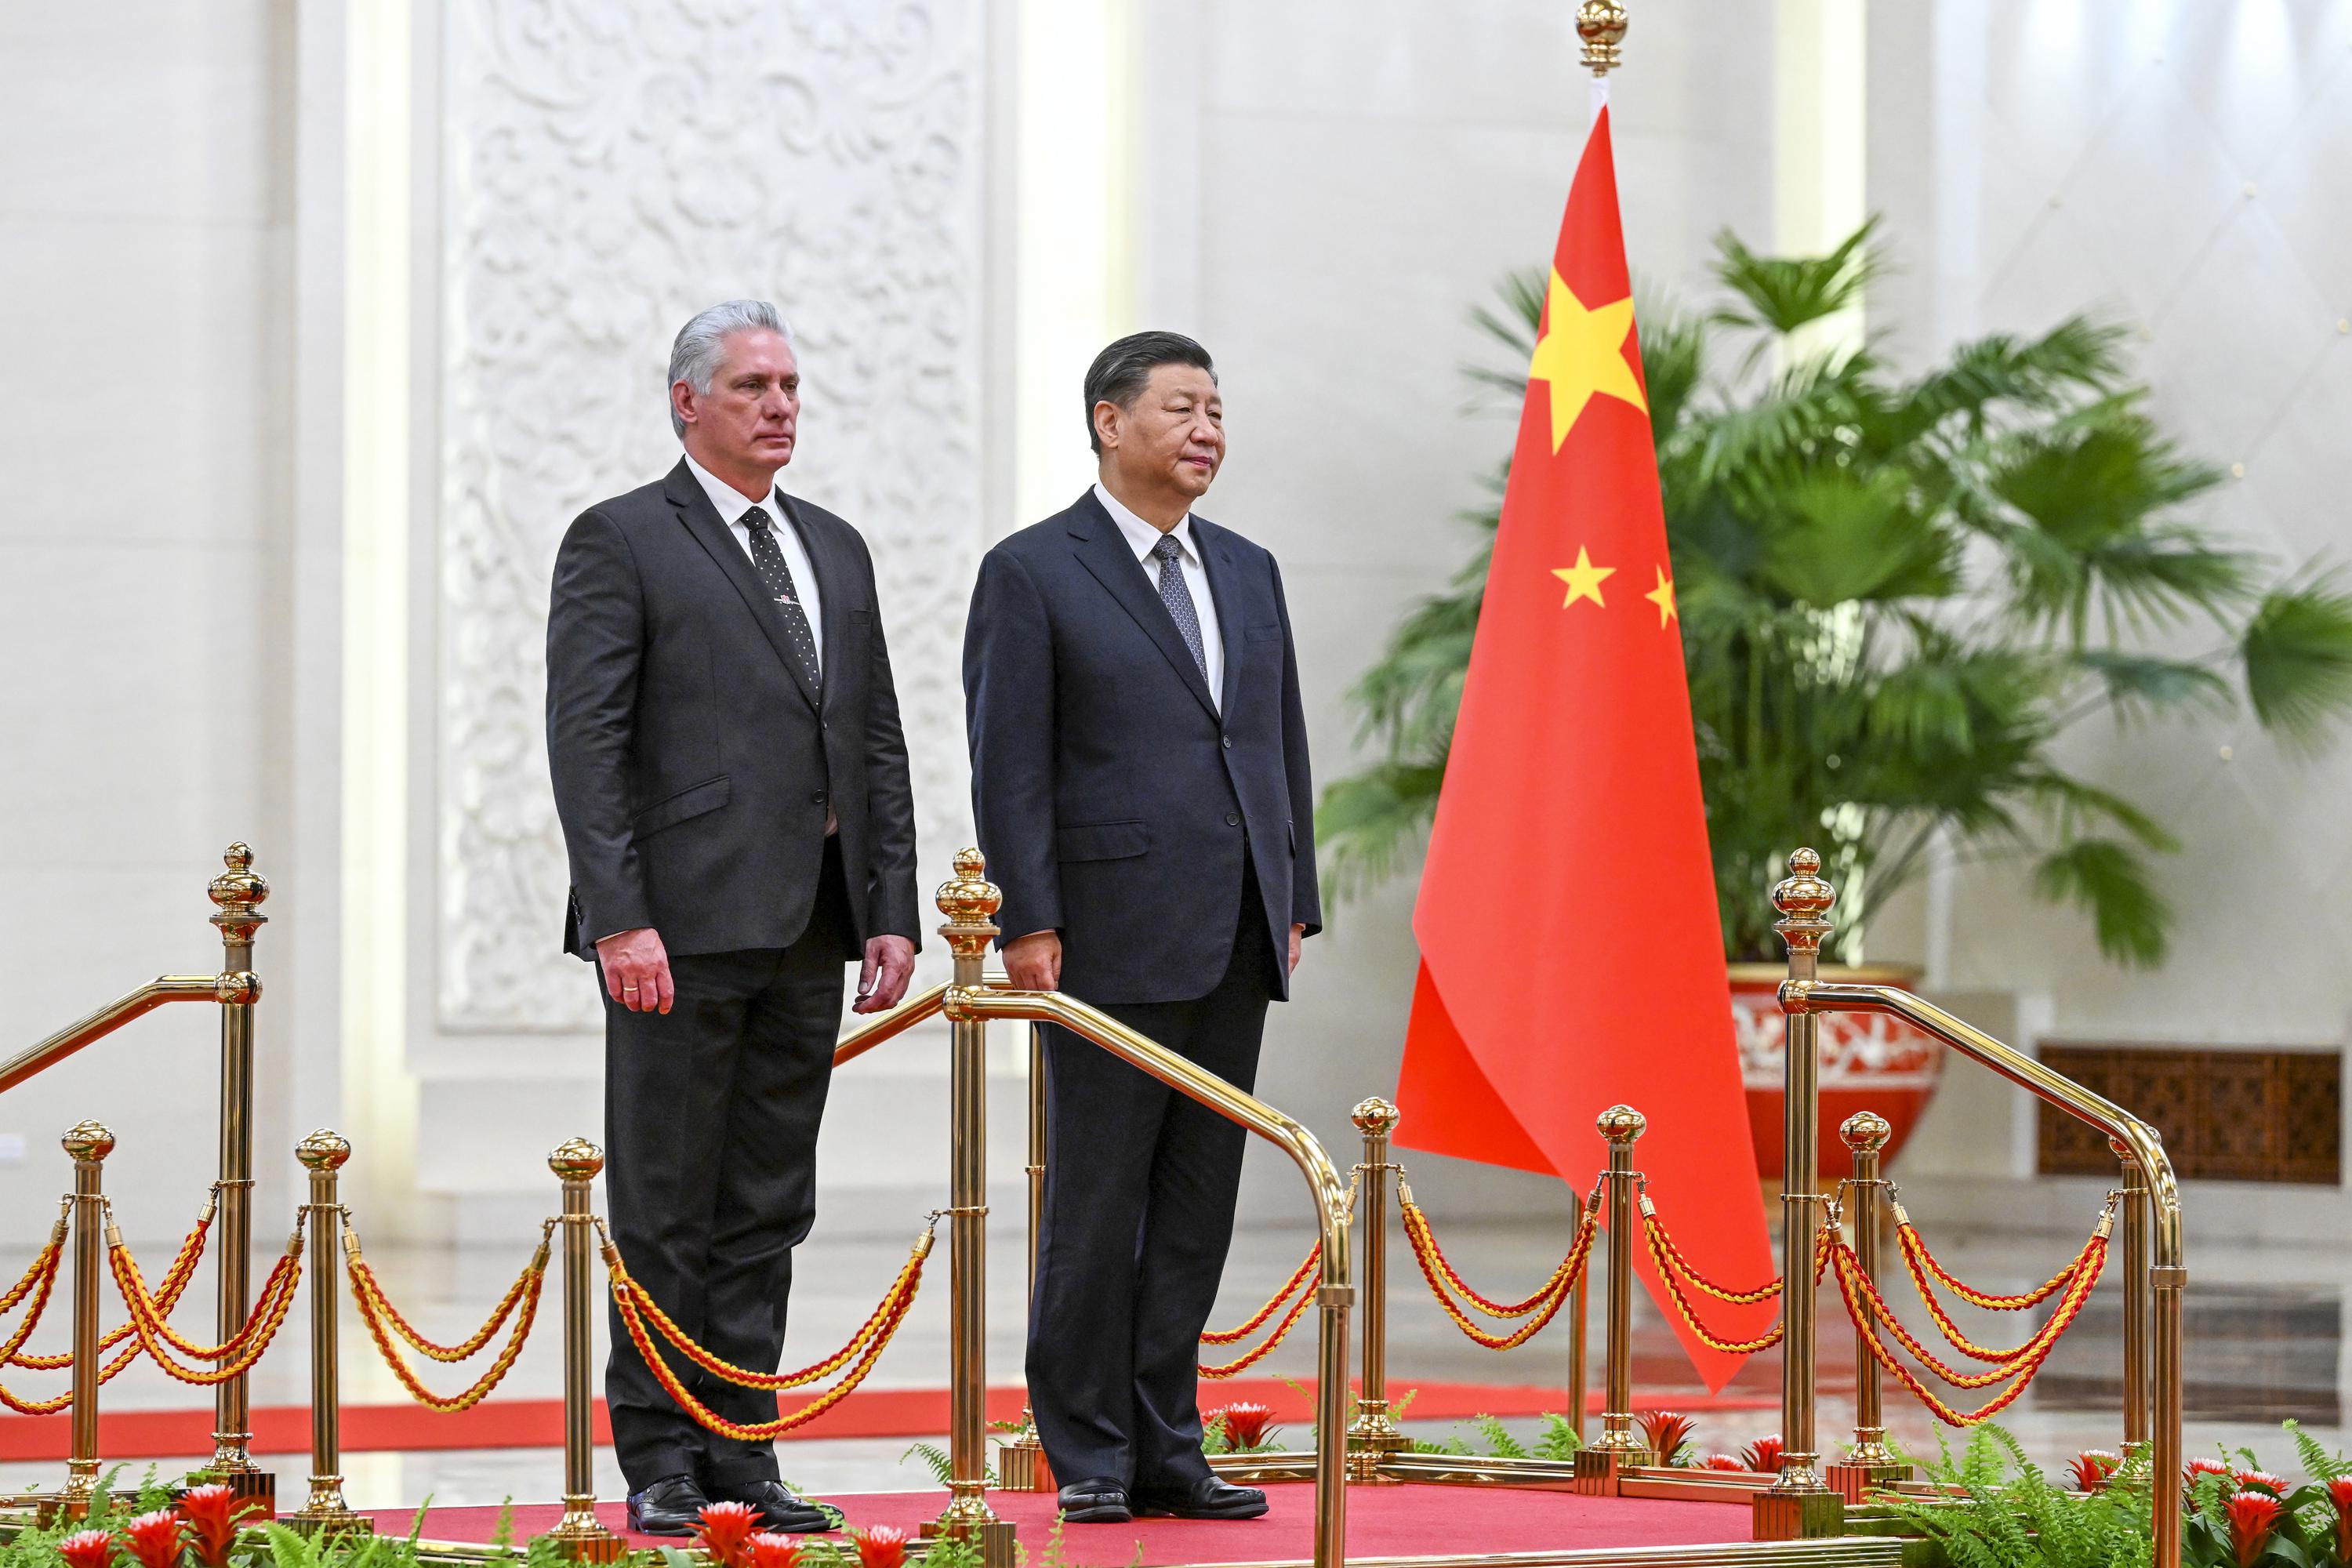 China’s Xi pledges support for Cuba on ‘core interests’